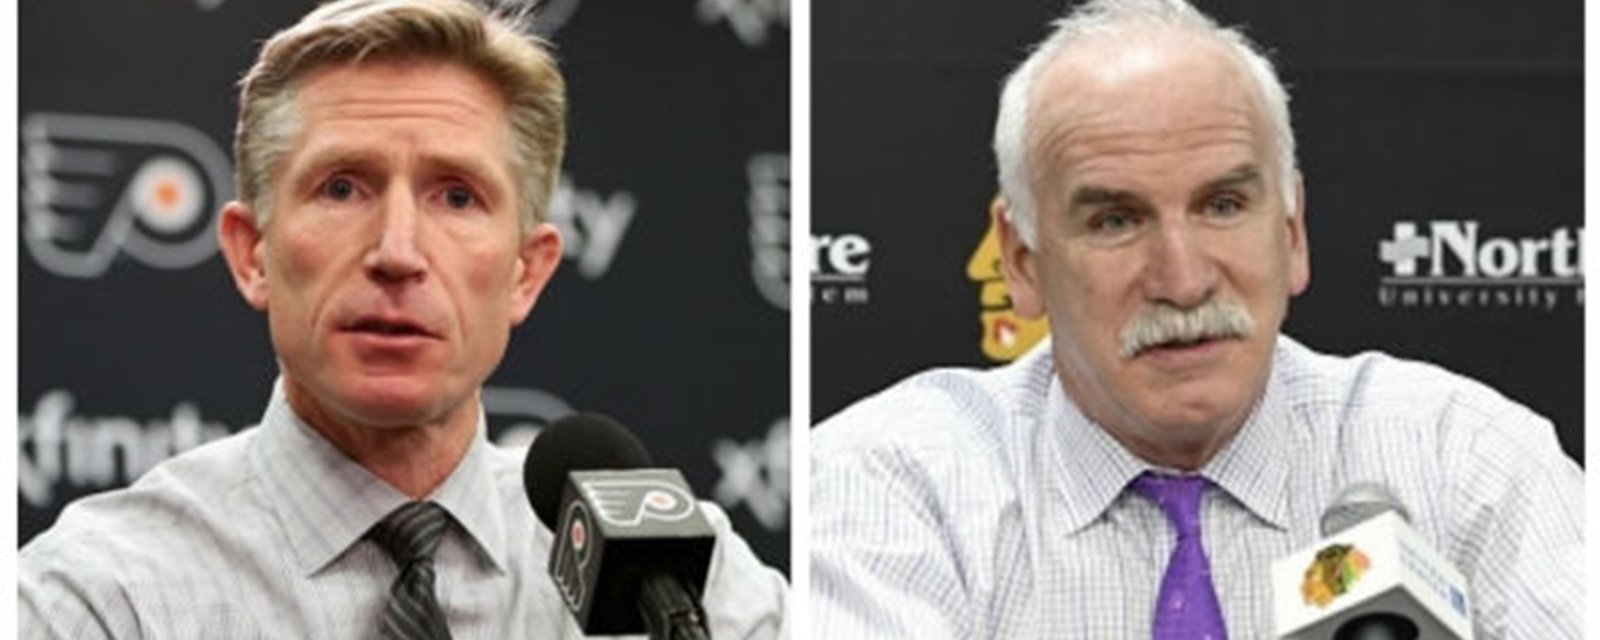 ICYMI: Flyers fire Hakstol, Quenneville pegged for open coaching spot